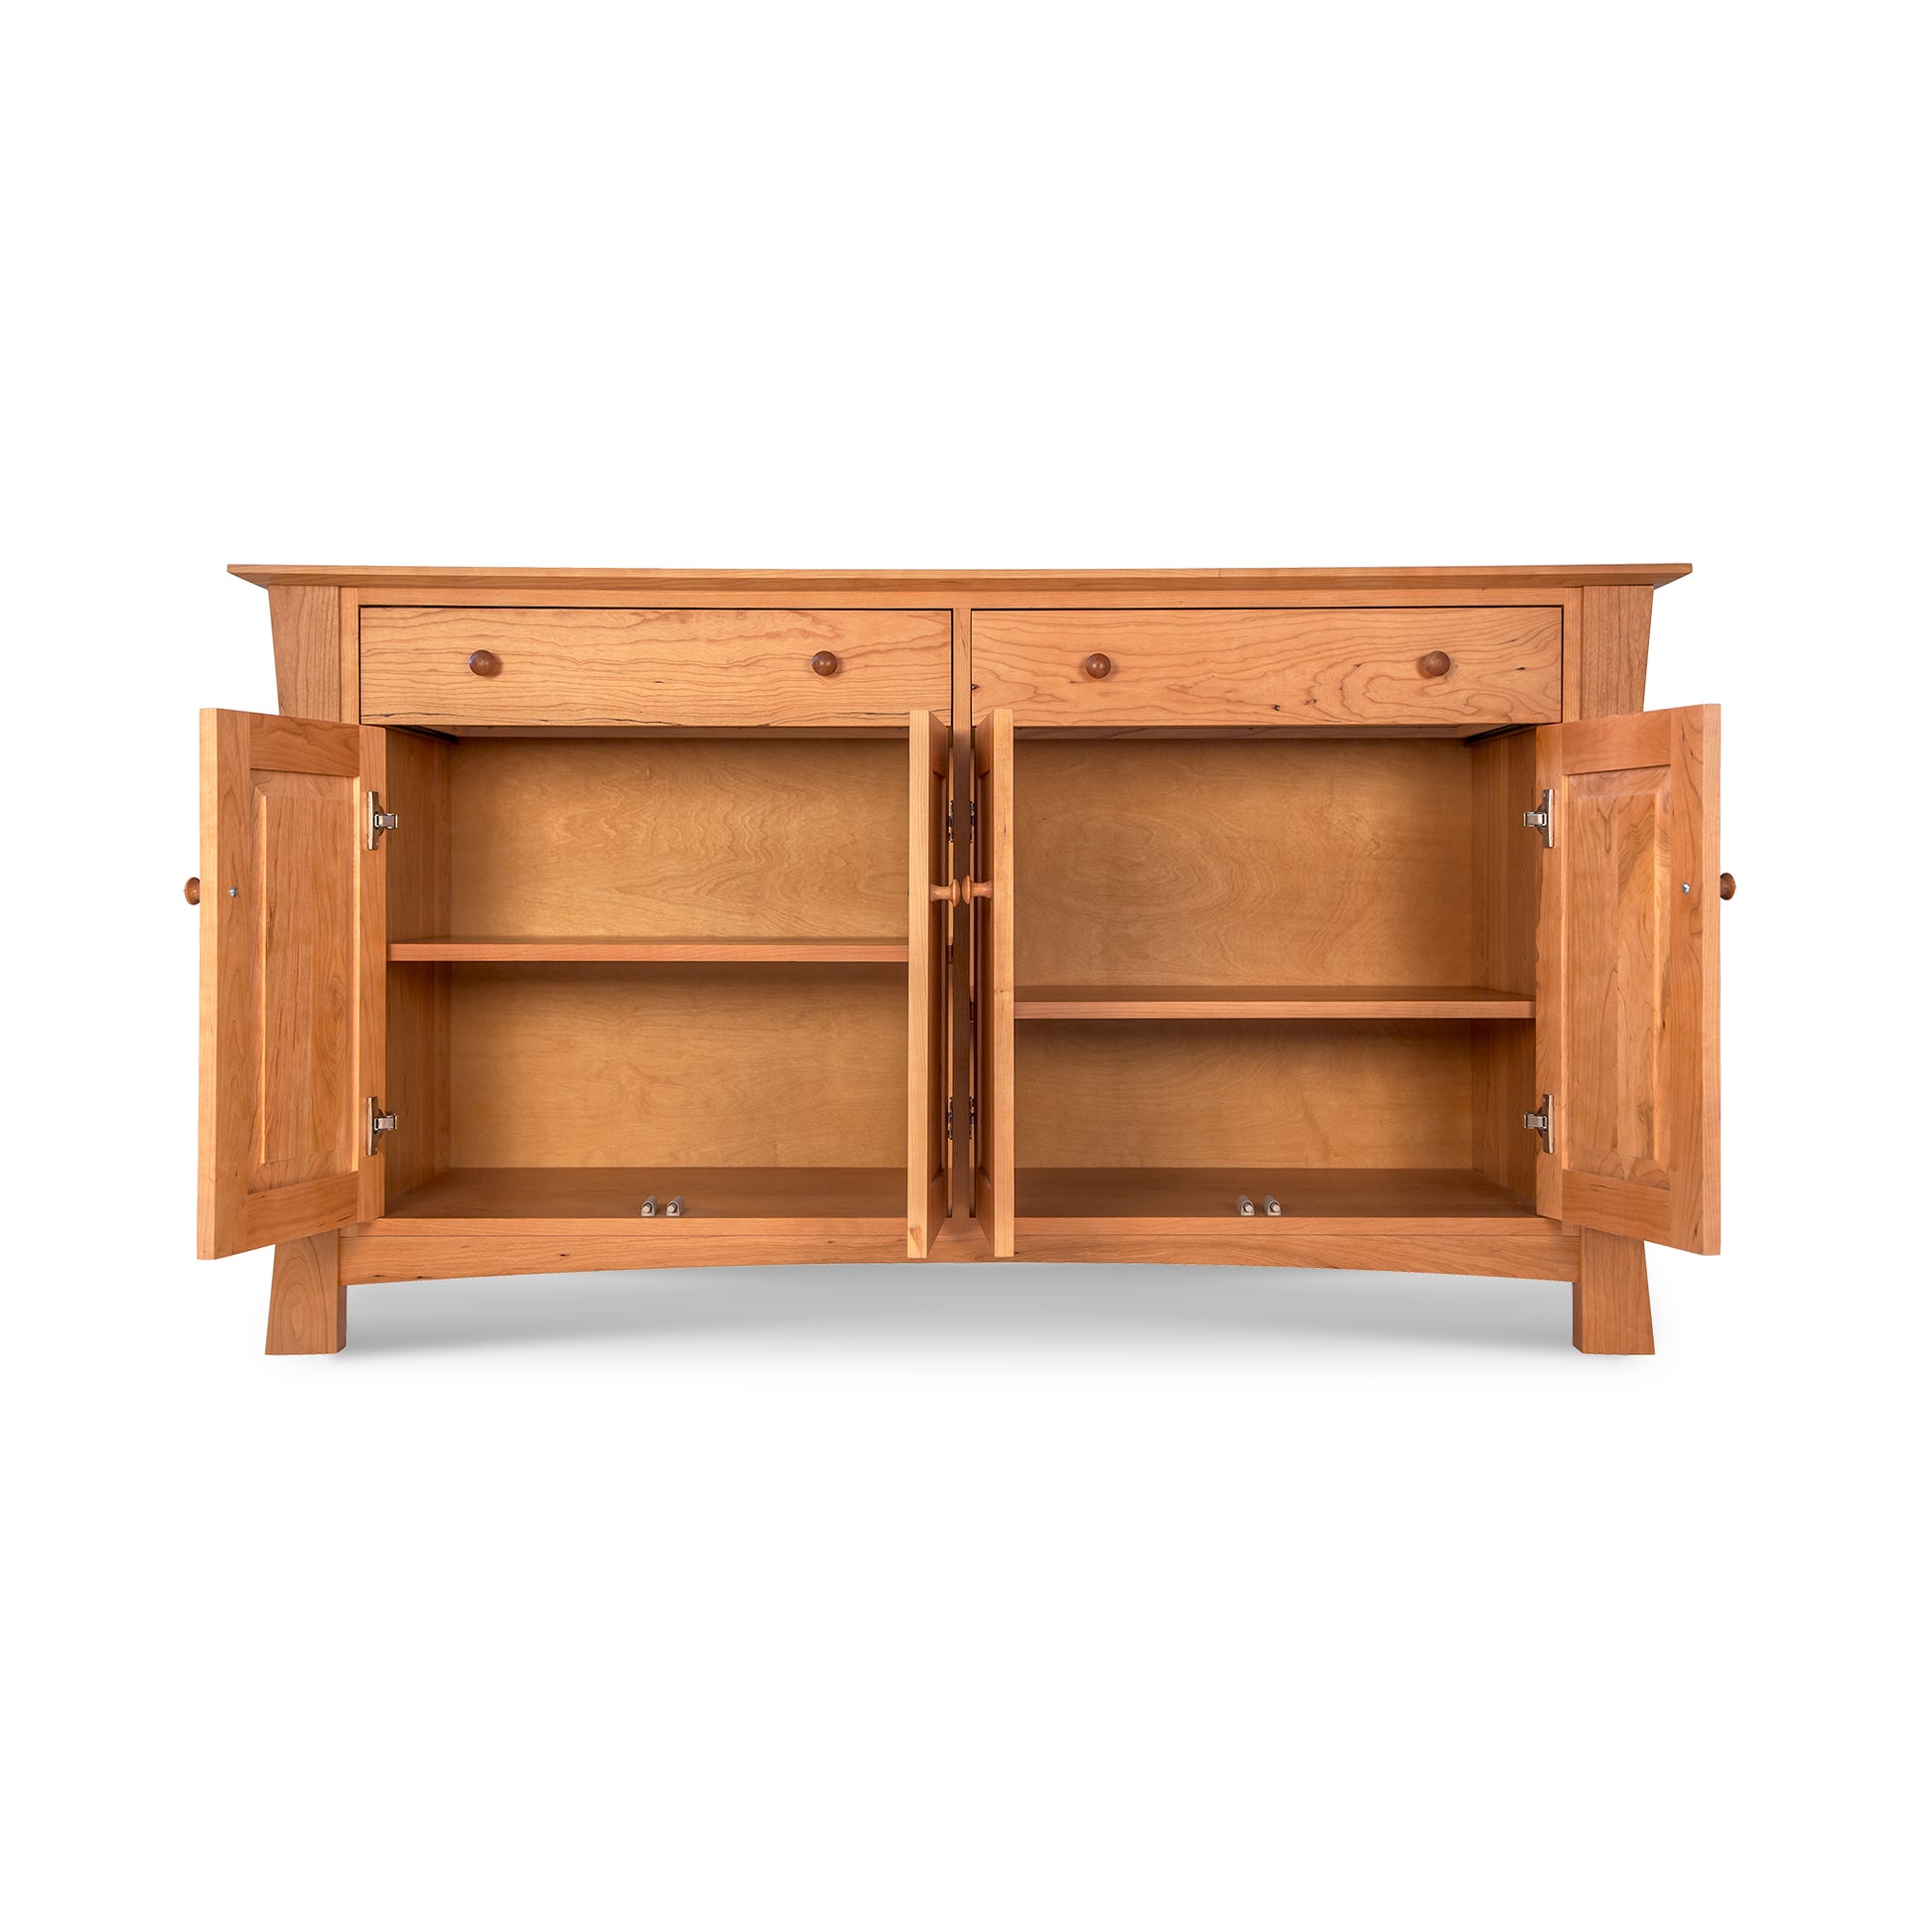 A Lyndon Furniture Andrews Buffet, a contemporary kitchen sideboard with two doors and two drawers, made of natural cherry wood.